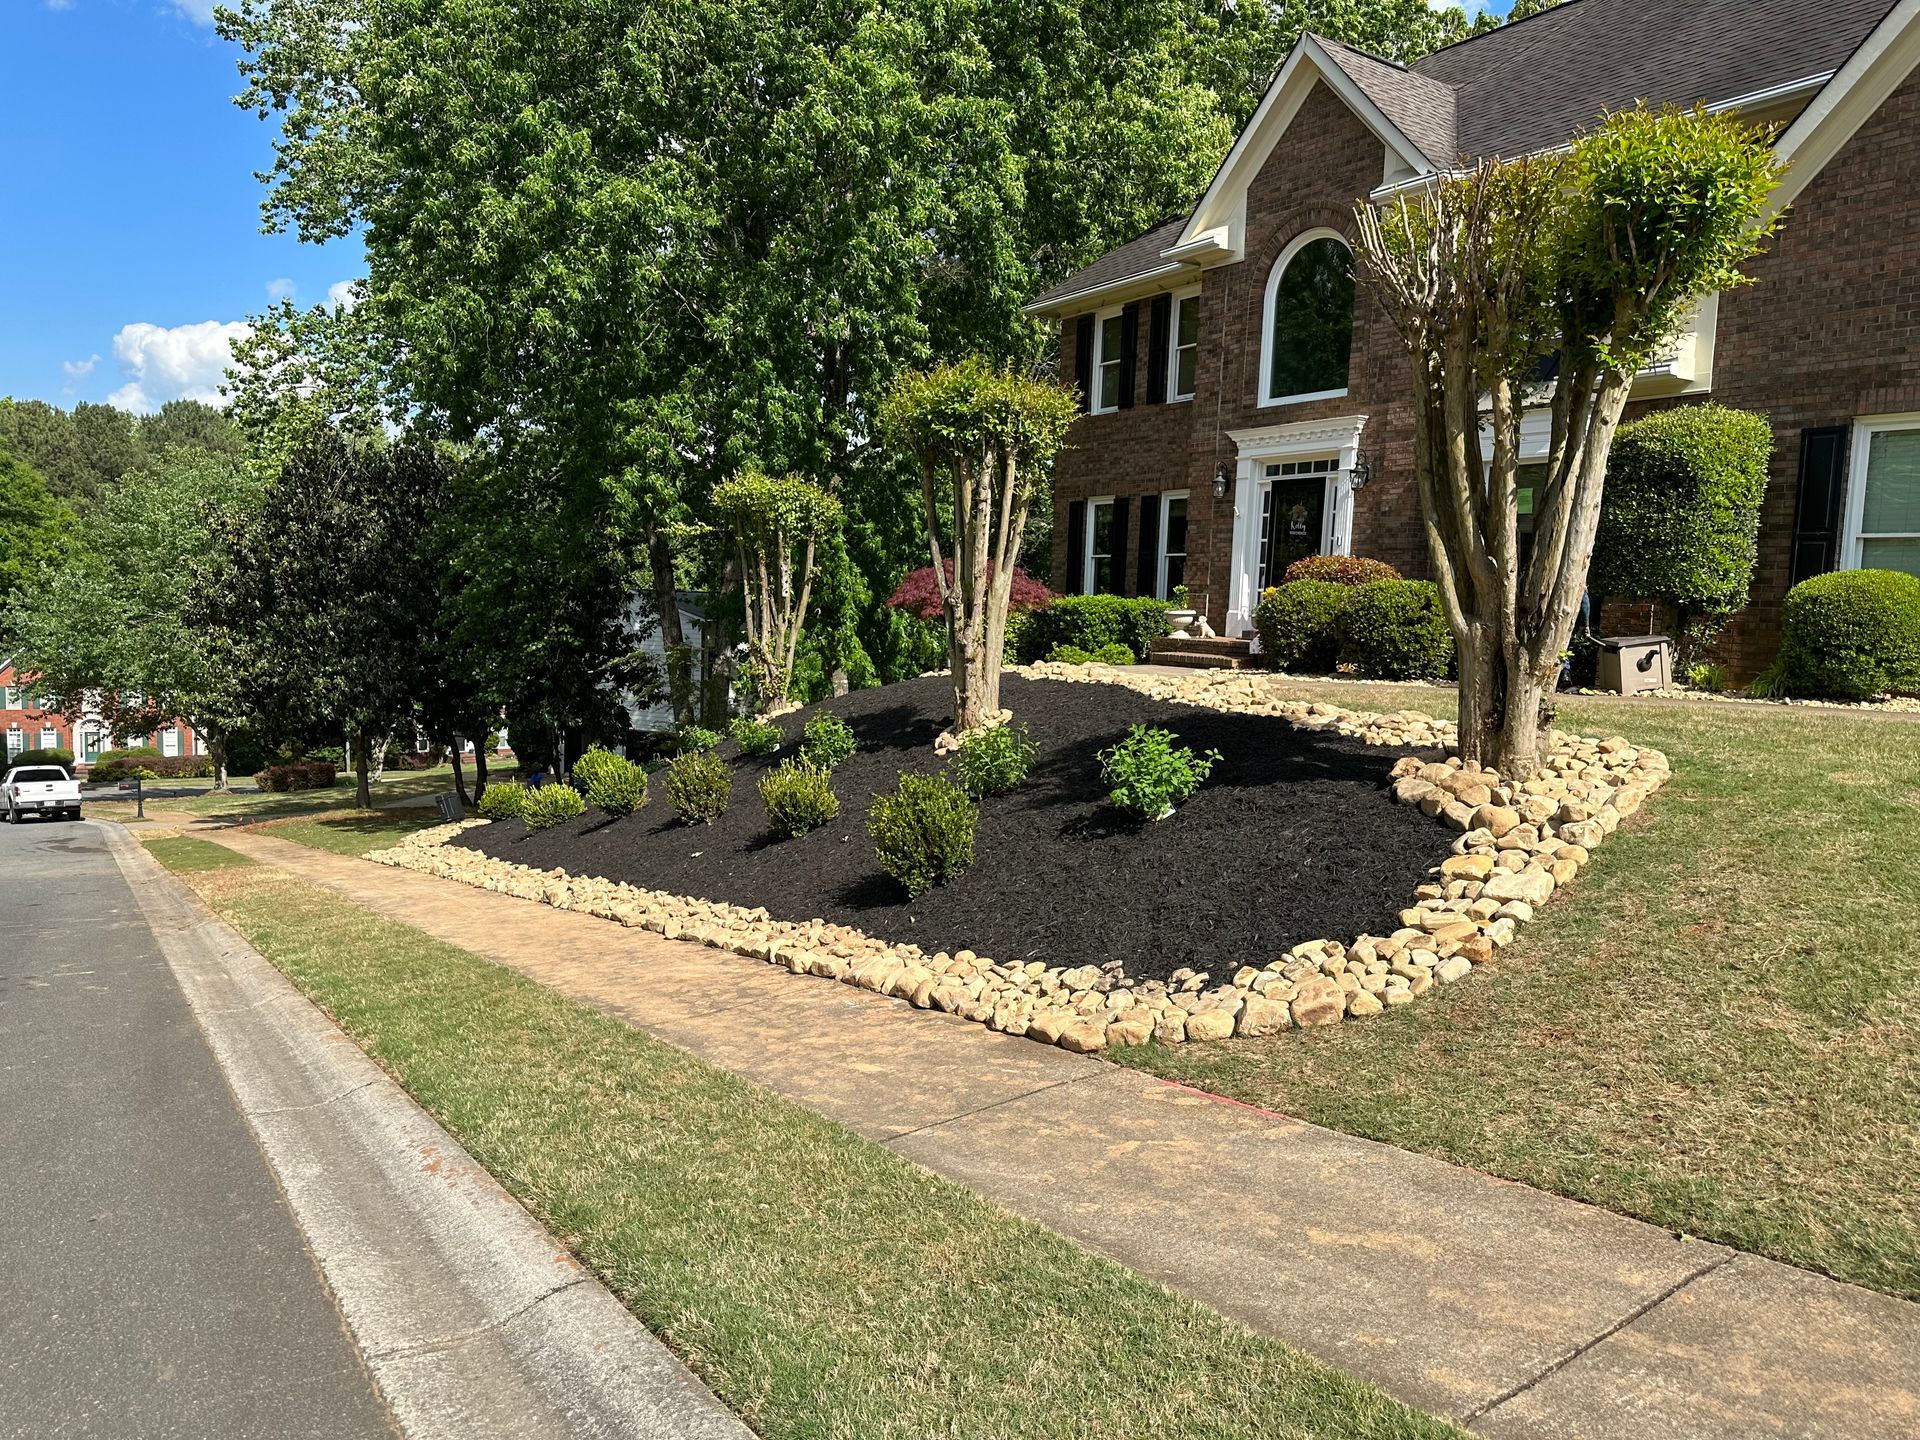 Freshly landscaped front yard with stone edging by RC Landscapes.